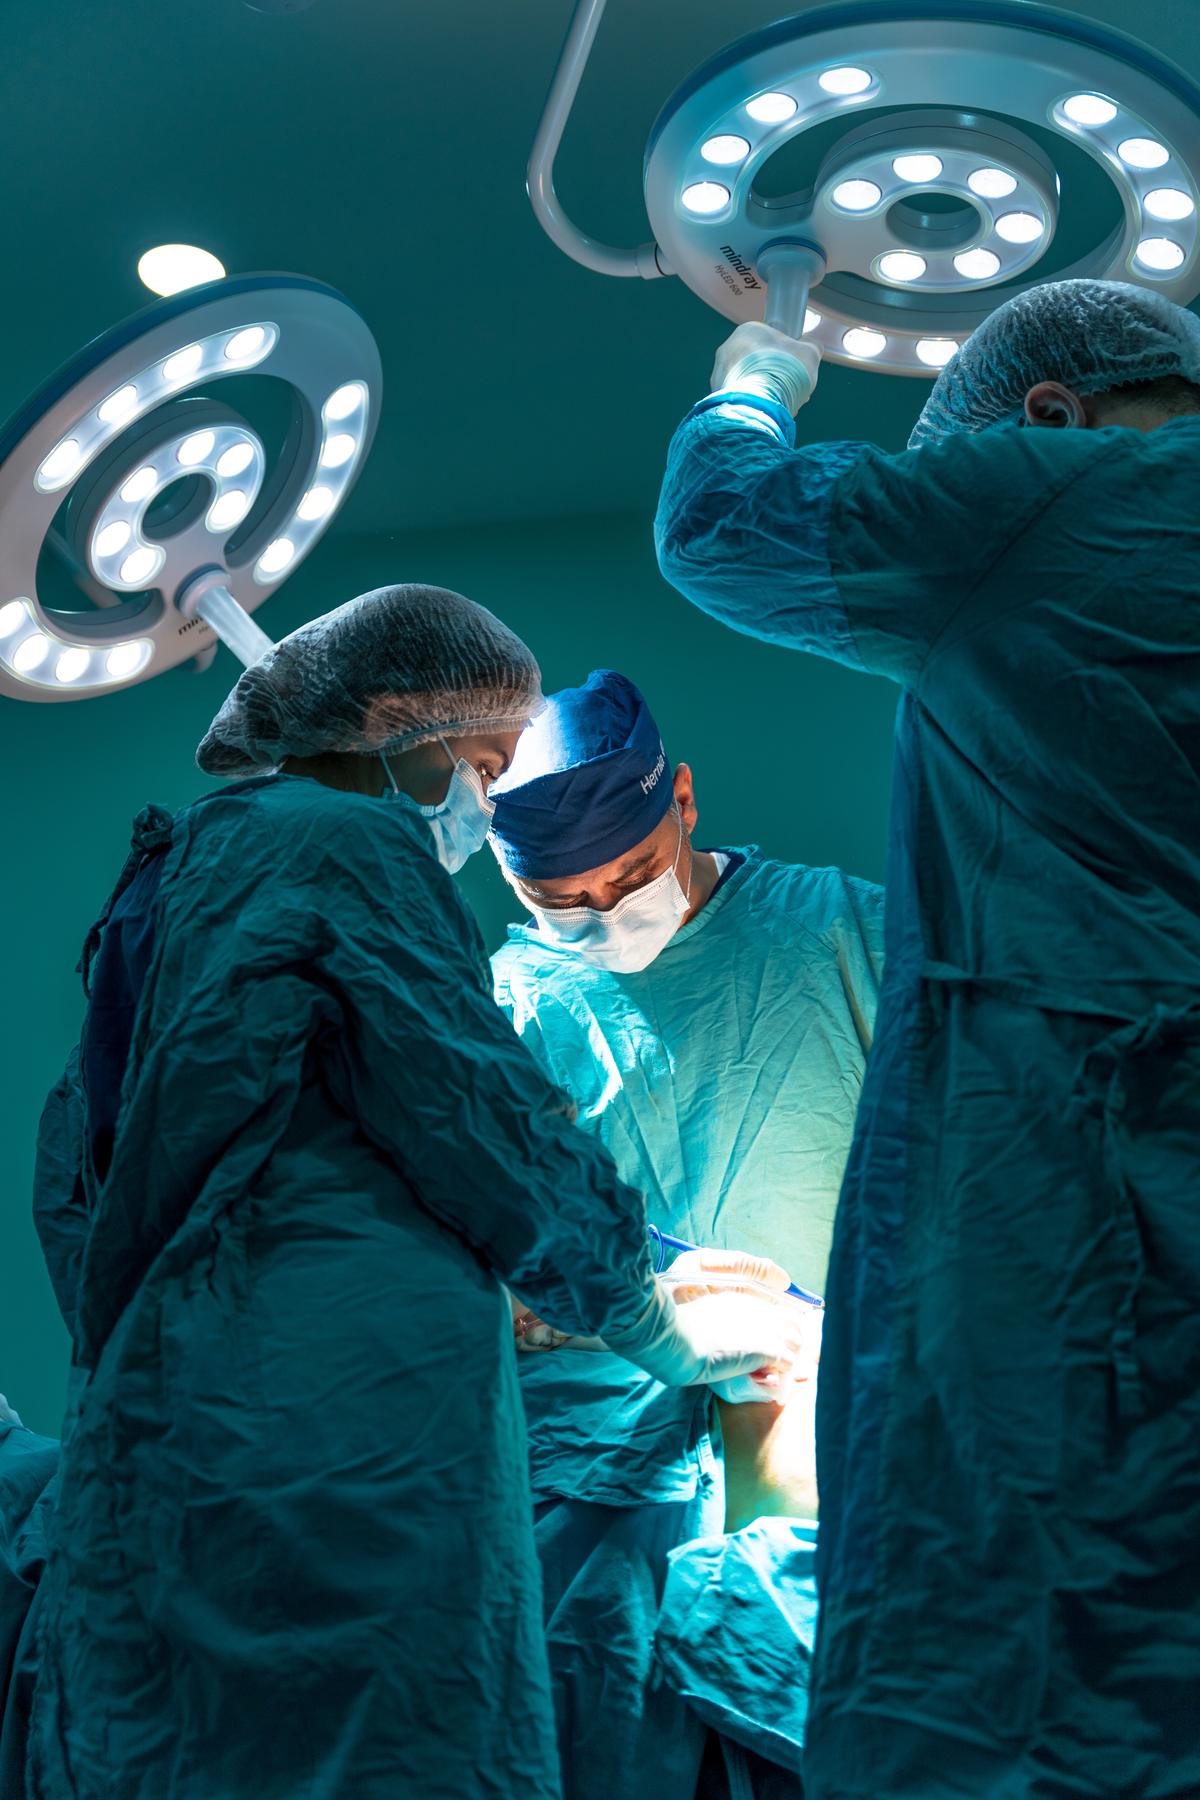 Intuitive Surgical: A Strong Return to Medical Normal